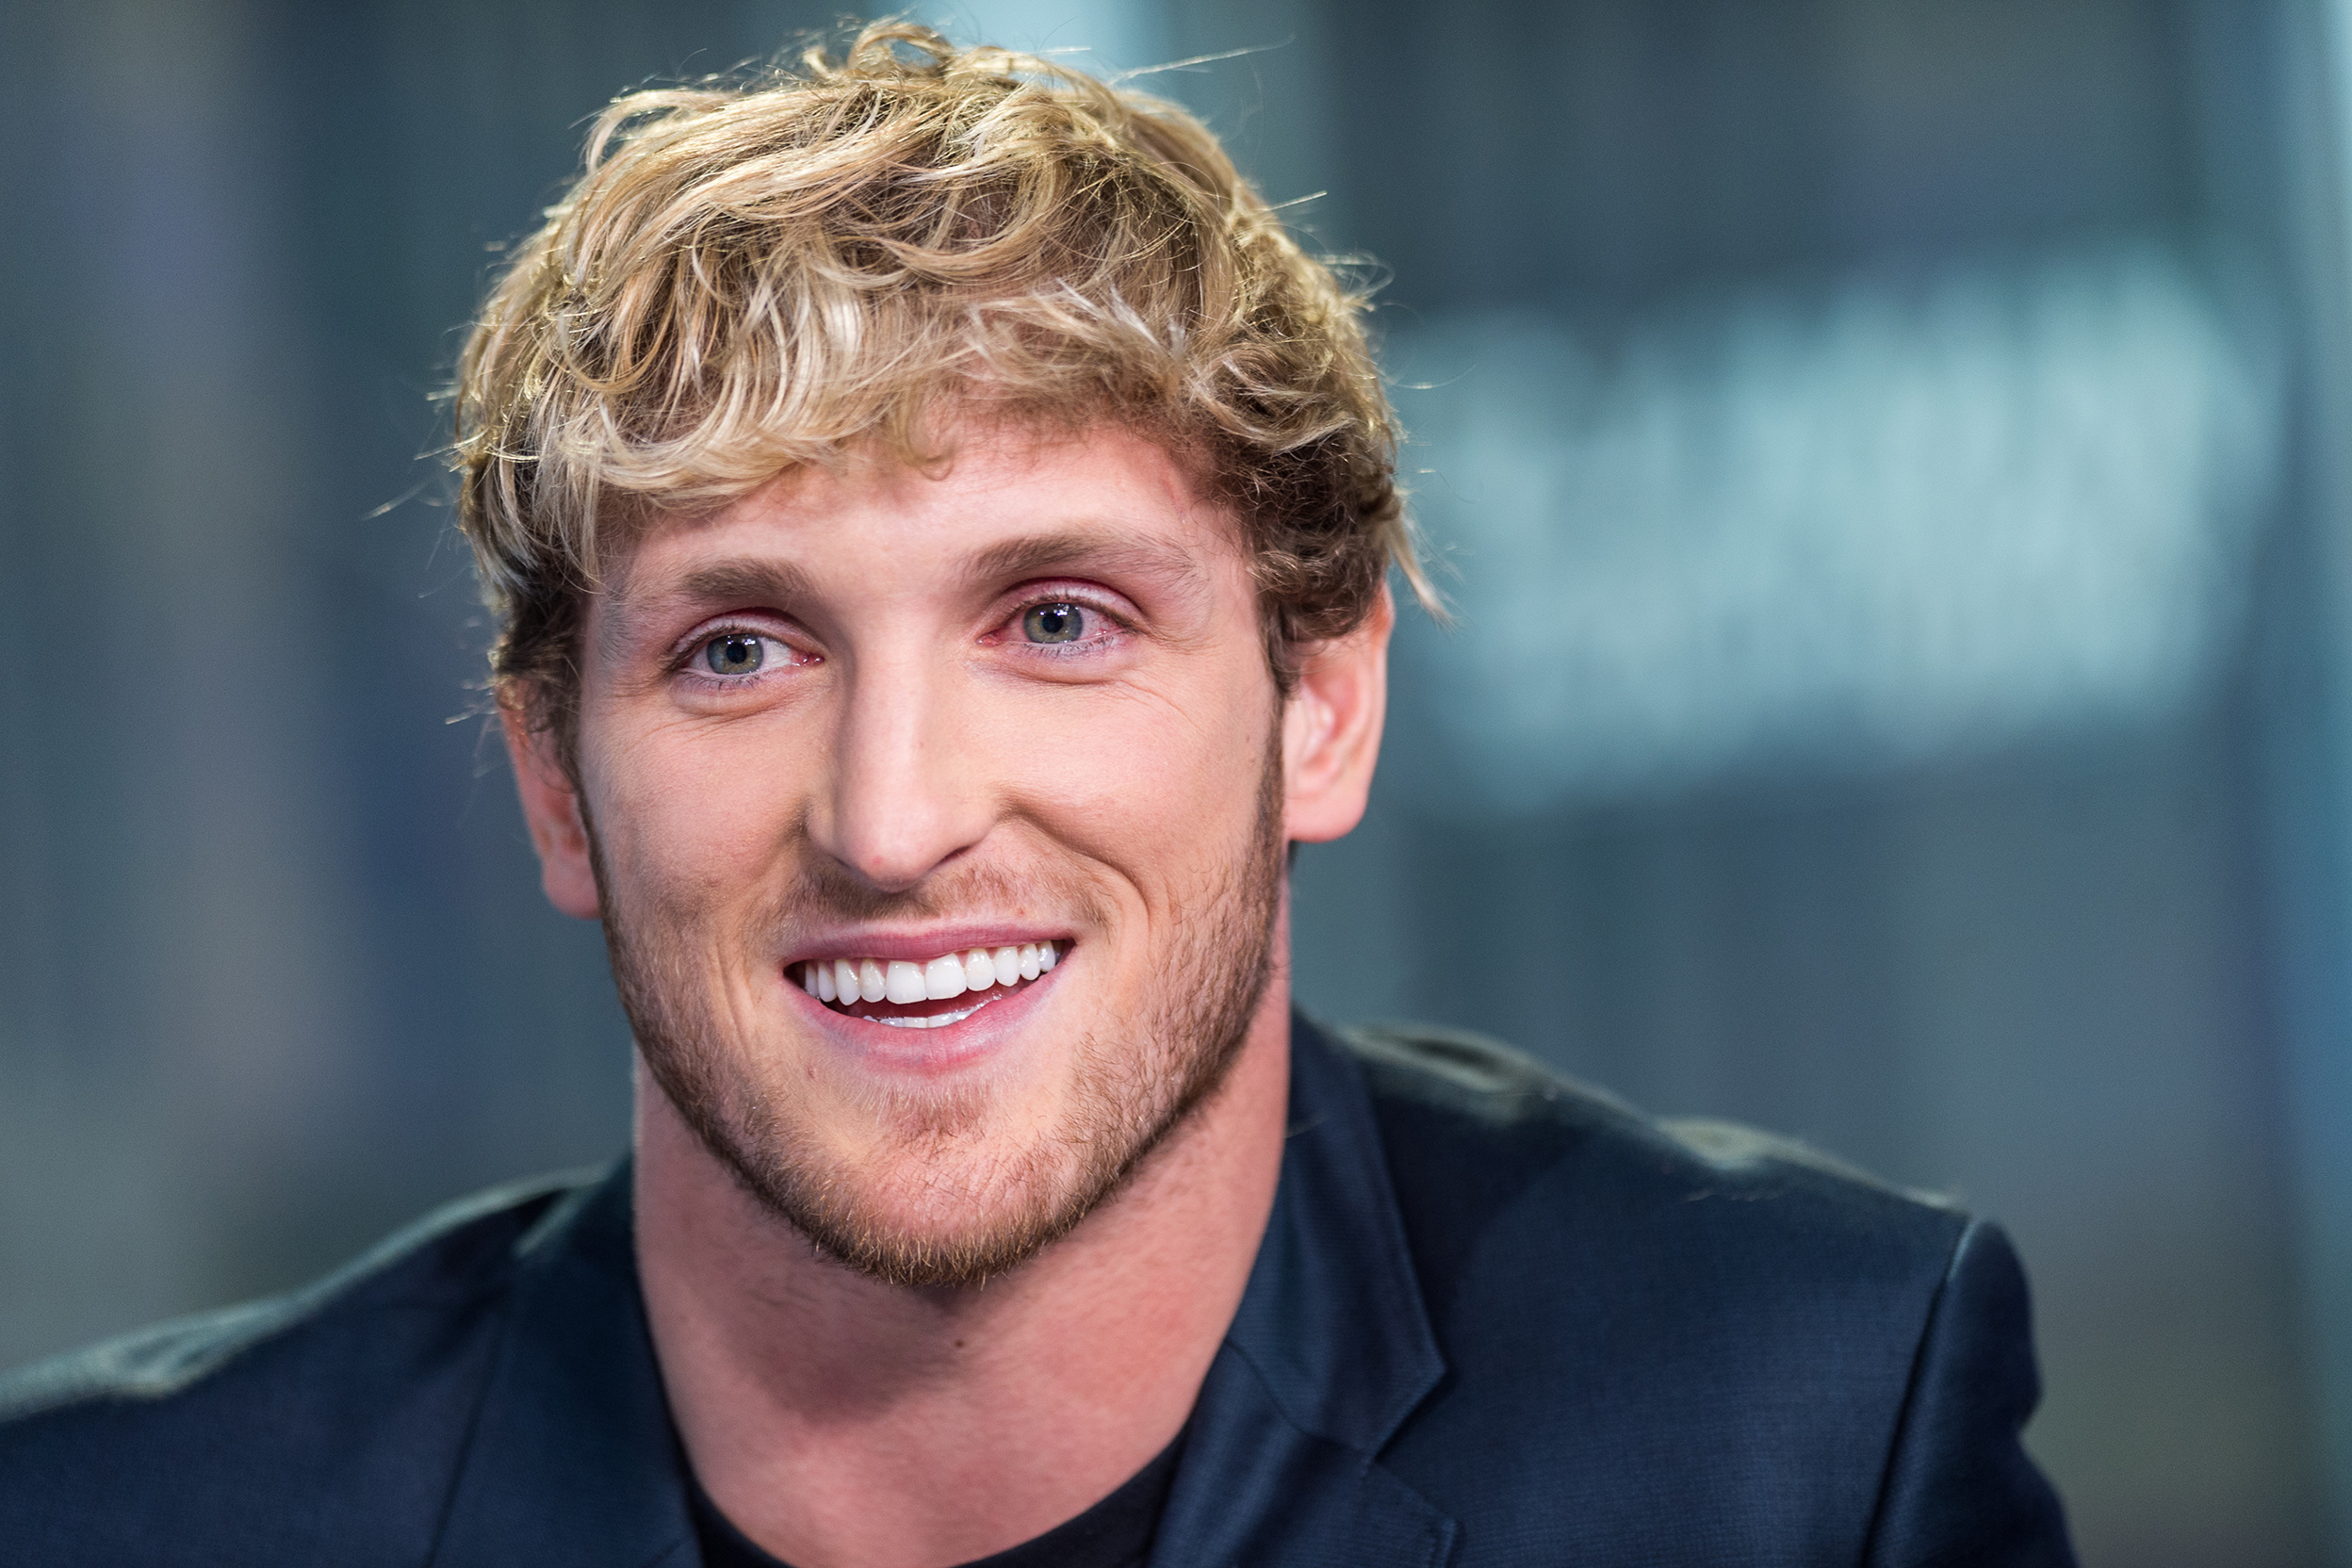 YouTuber Logan Paul is sued over 'suicide forest' video